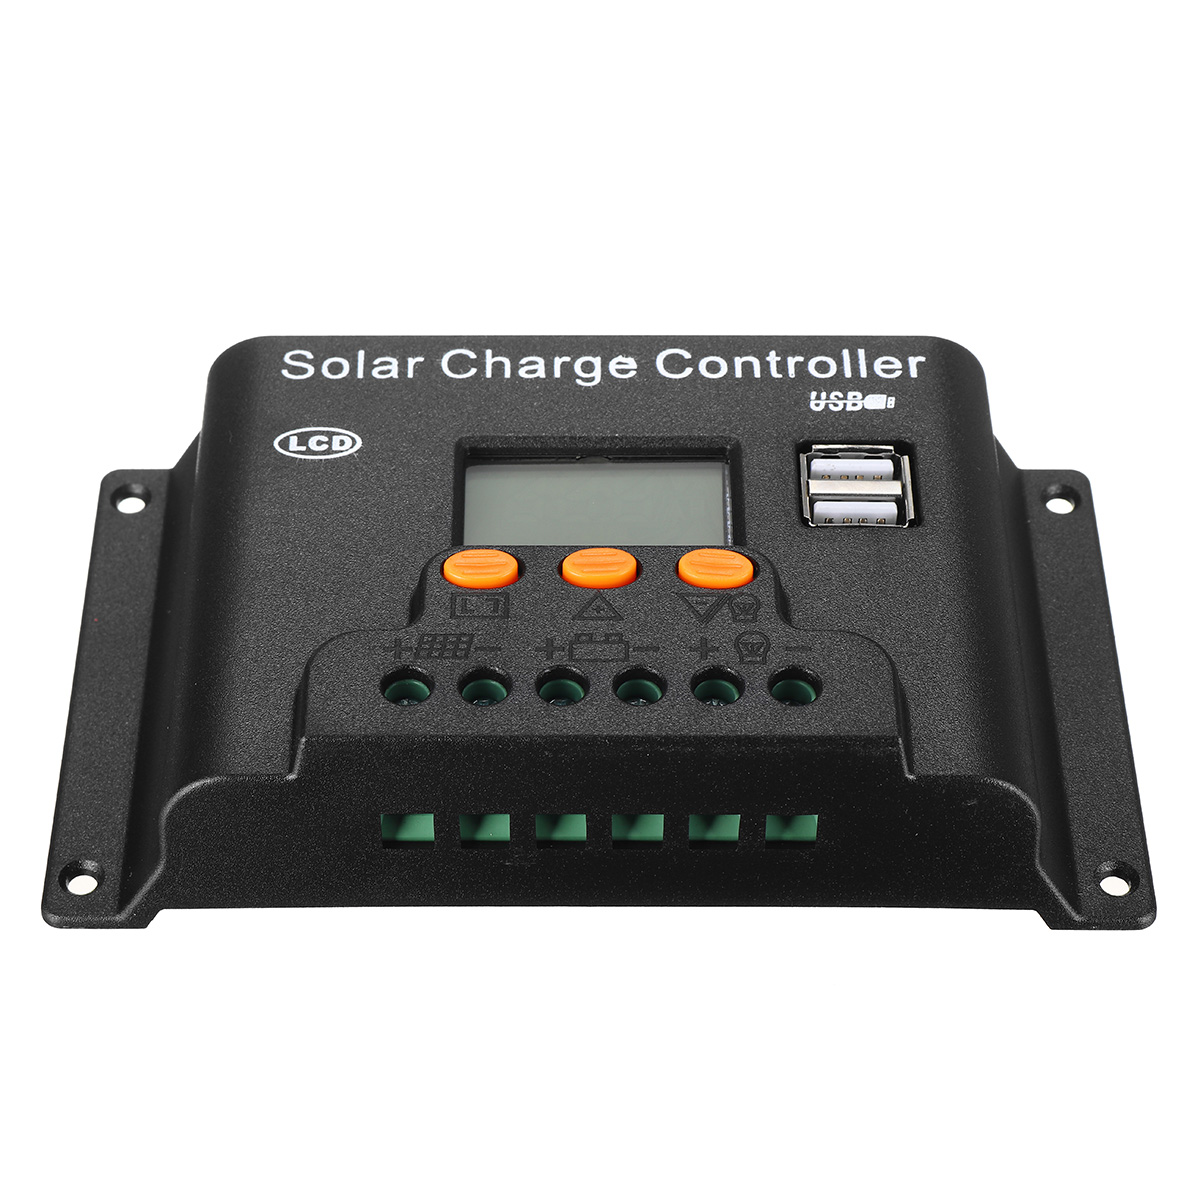 10/20/30/40/50/60A 12v/24v Adjust PWN Solar Battery Charge Controller for Solar Panel Support Dual USB Output/Large LCD Display 5